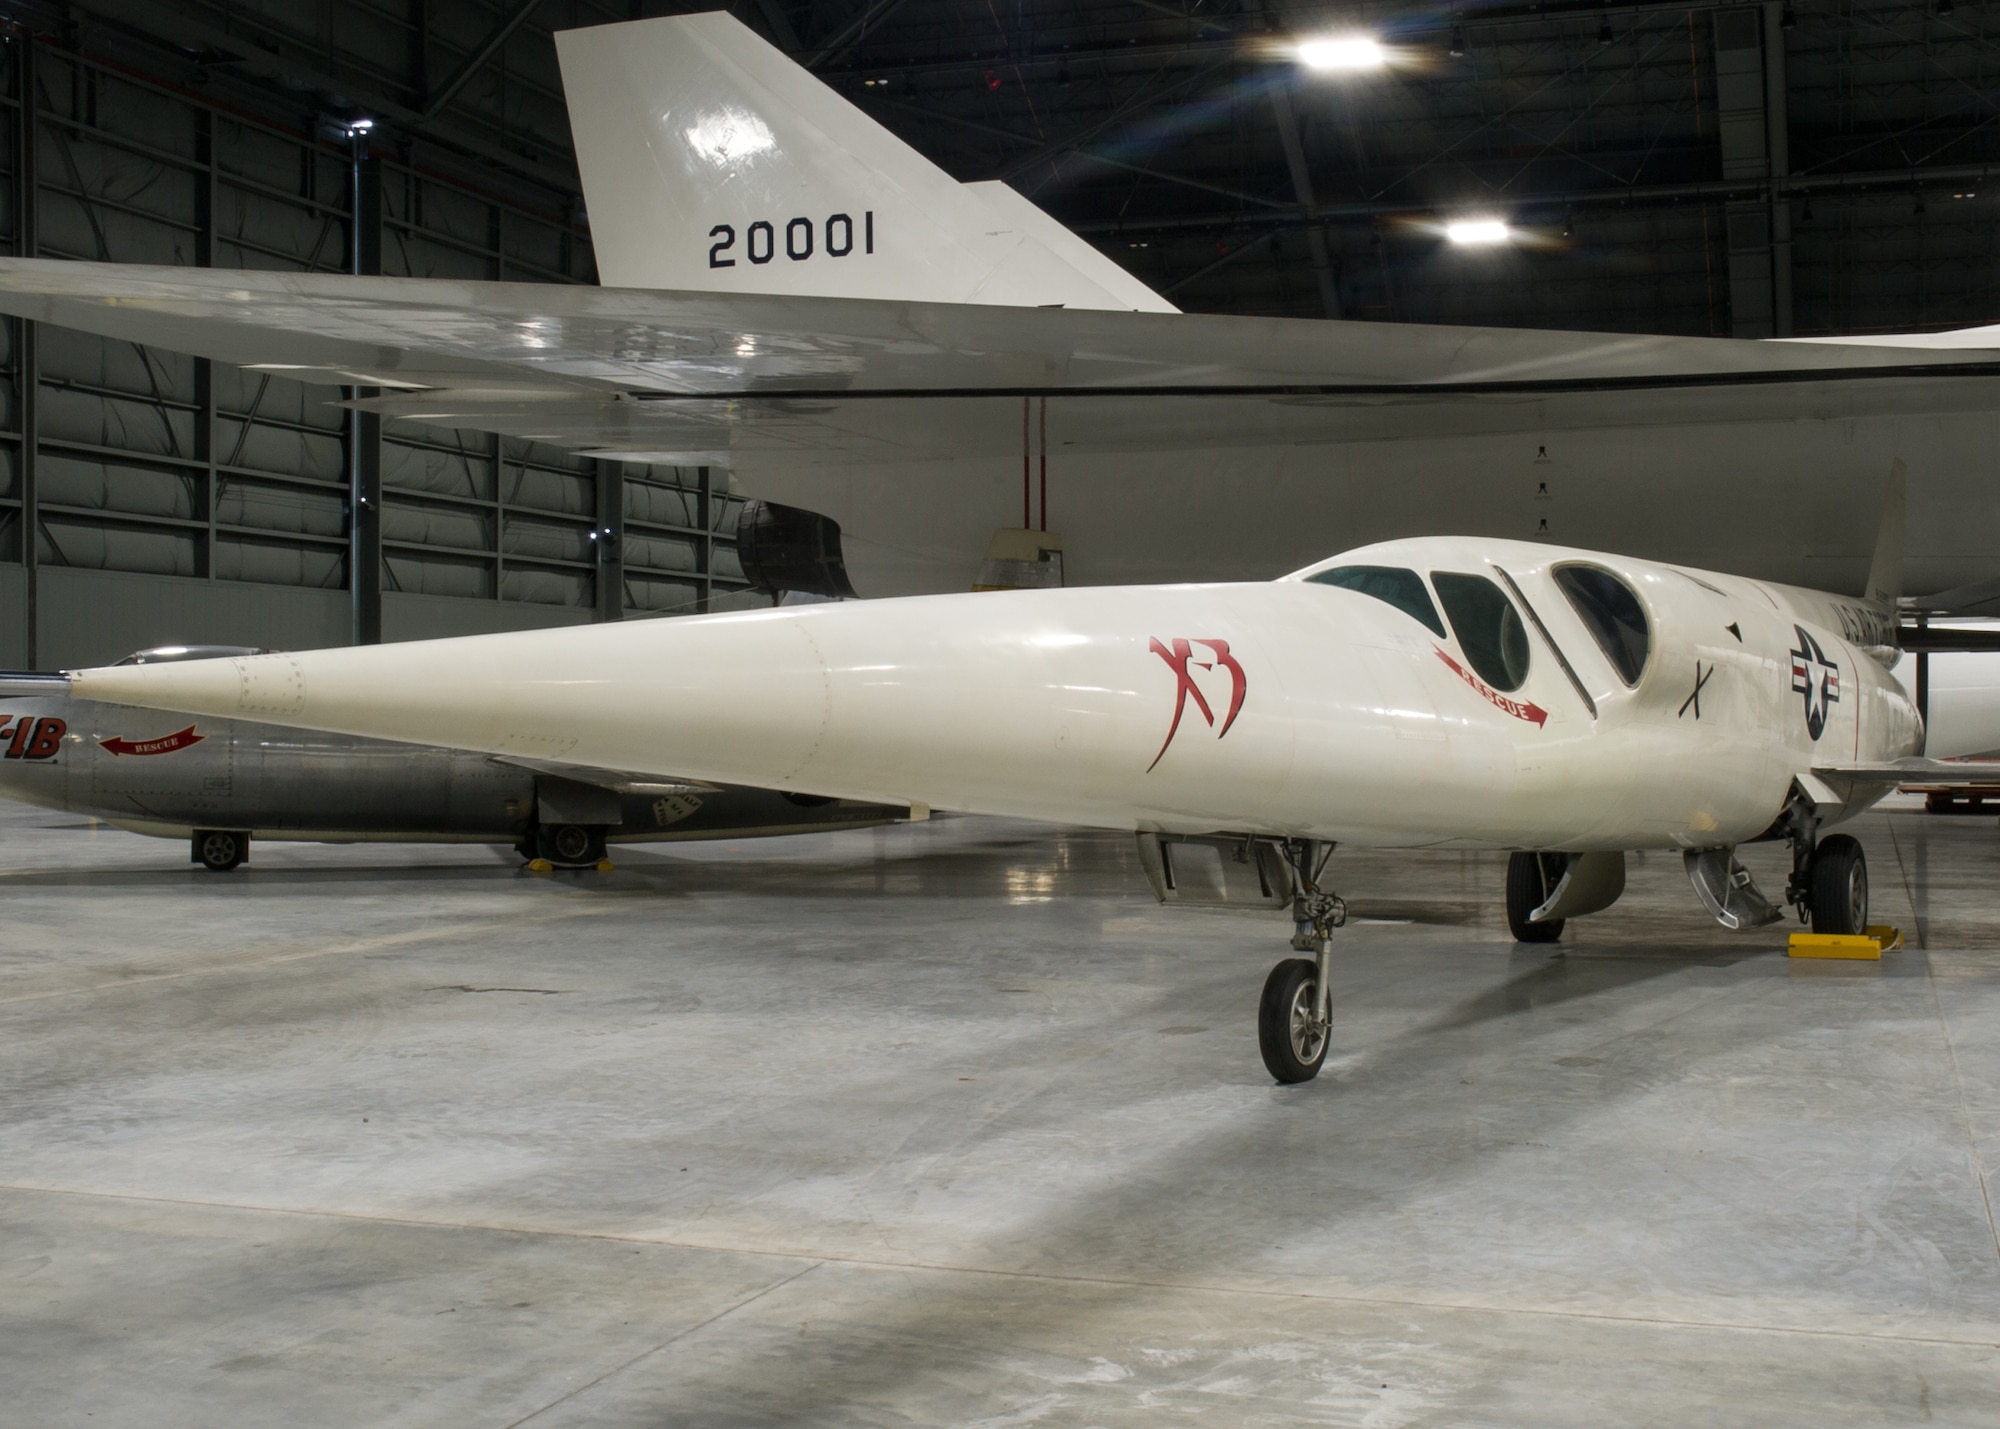 Douglas X-3 Stiletto in the Research & Development Gallery at the National Museum of the U.S. Air Force. (U.S. Air Force photo)